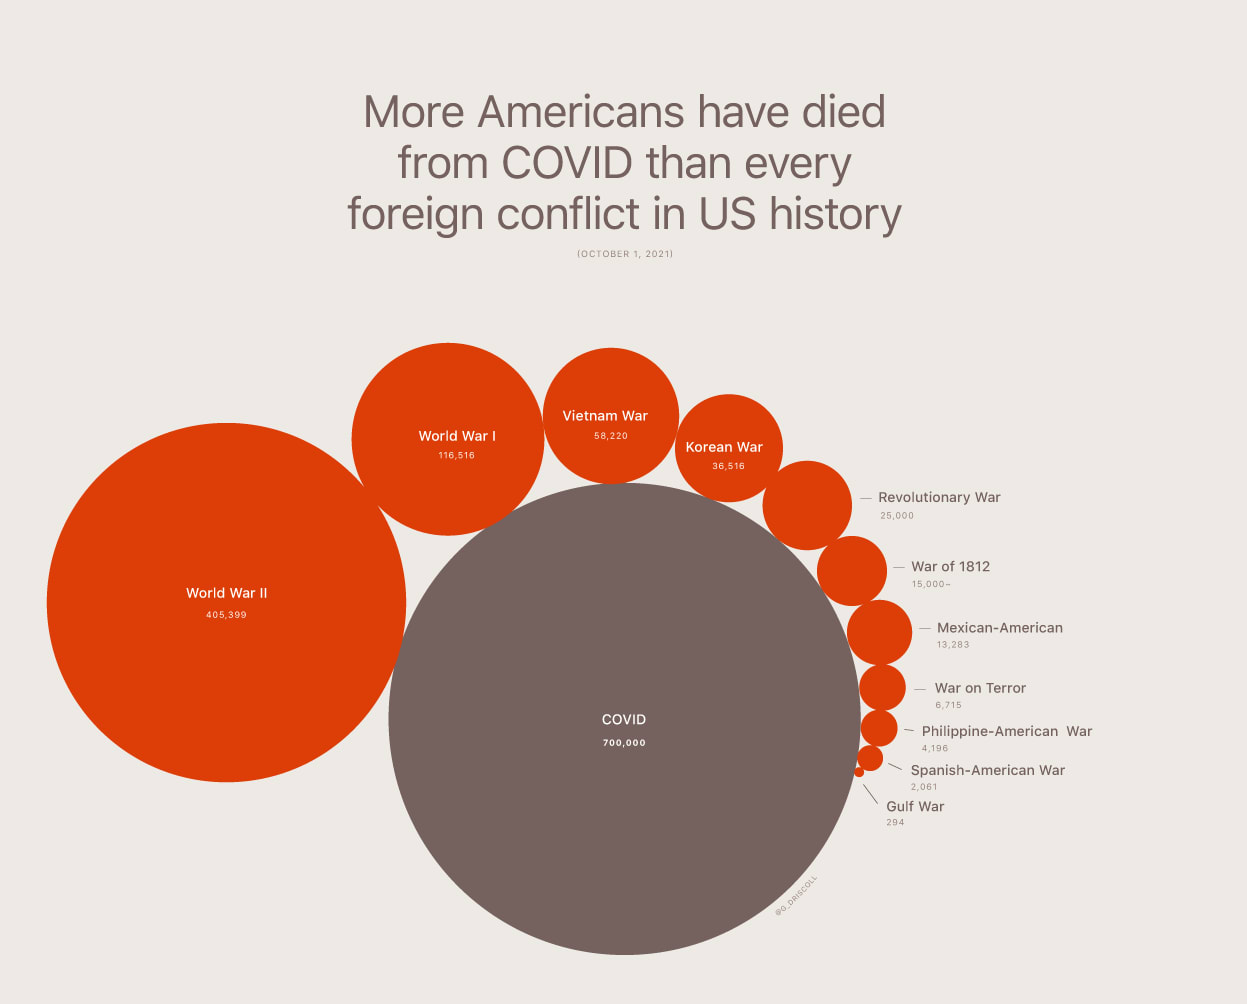 More Americans Have Died From COVID Than From All Foreign Conflicts in US history